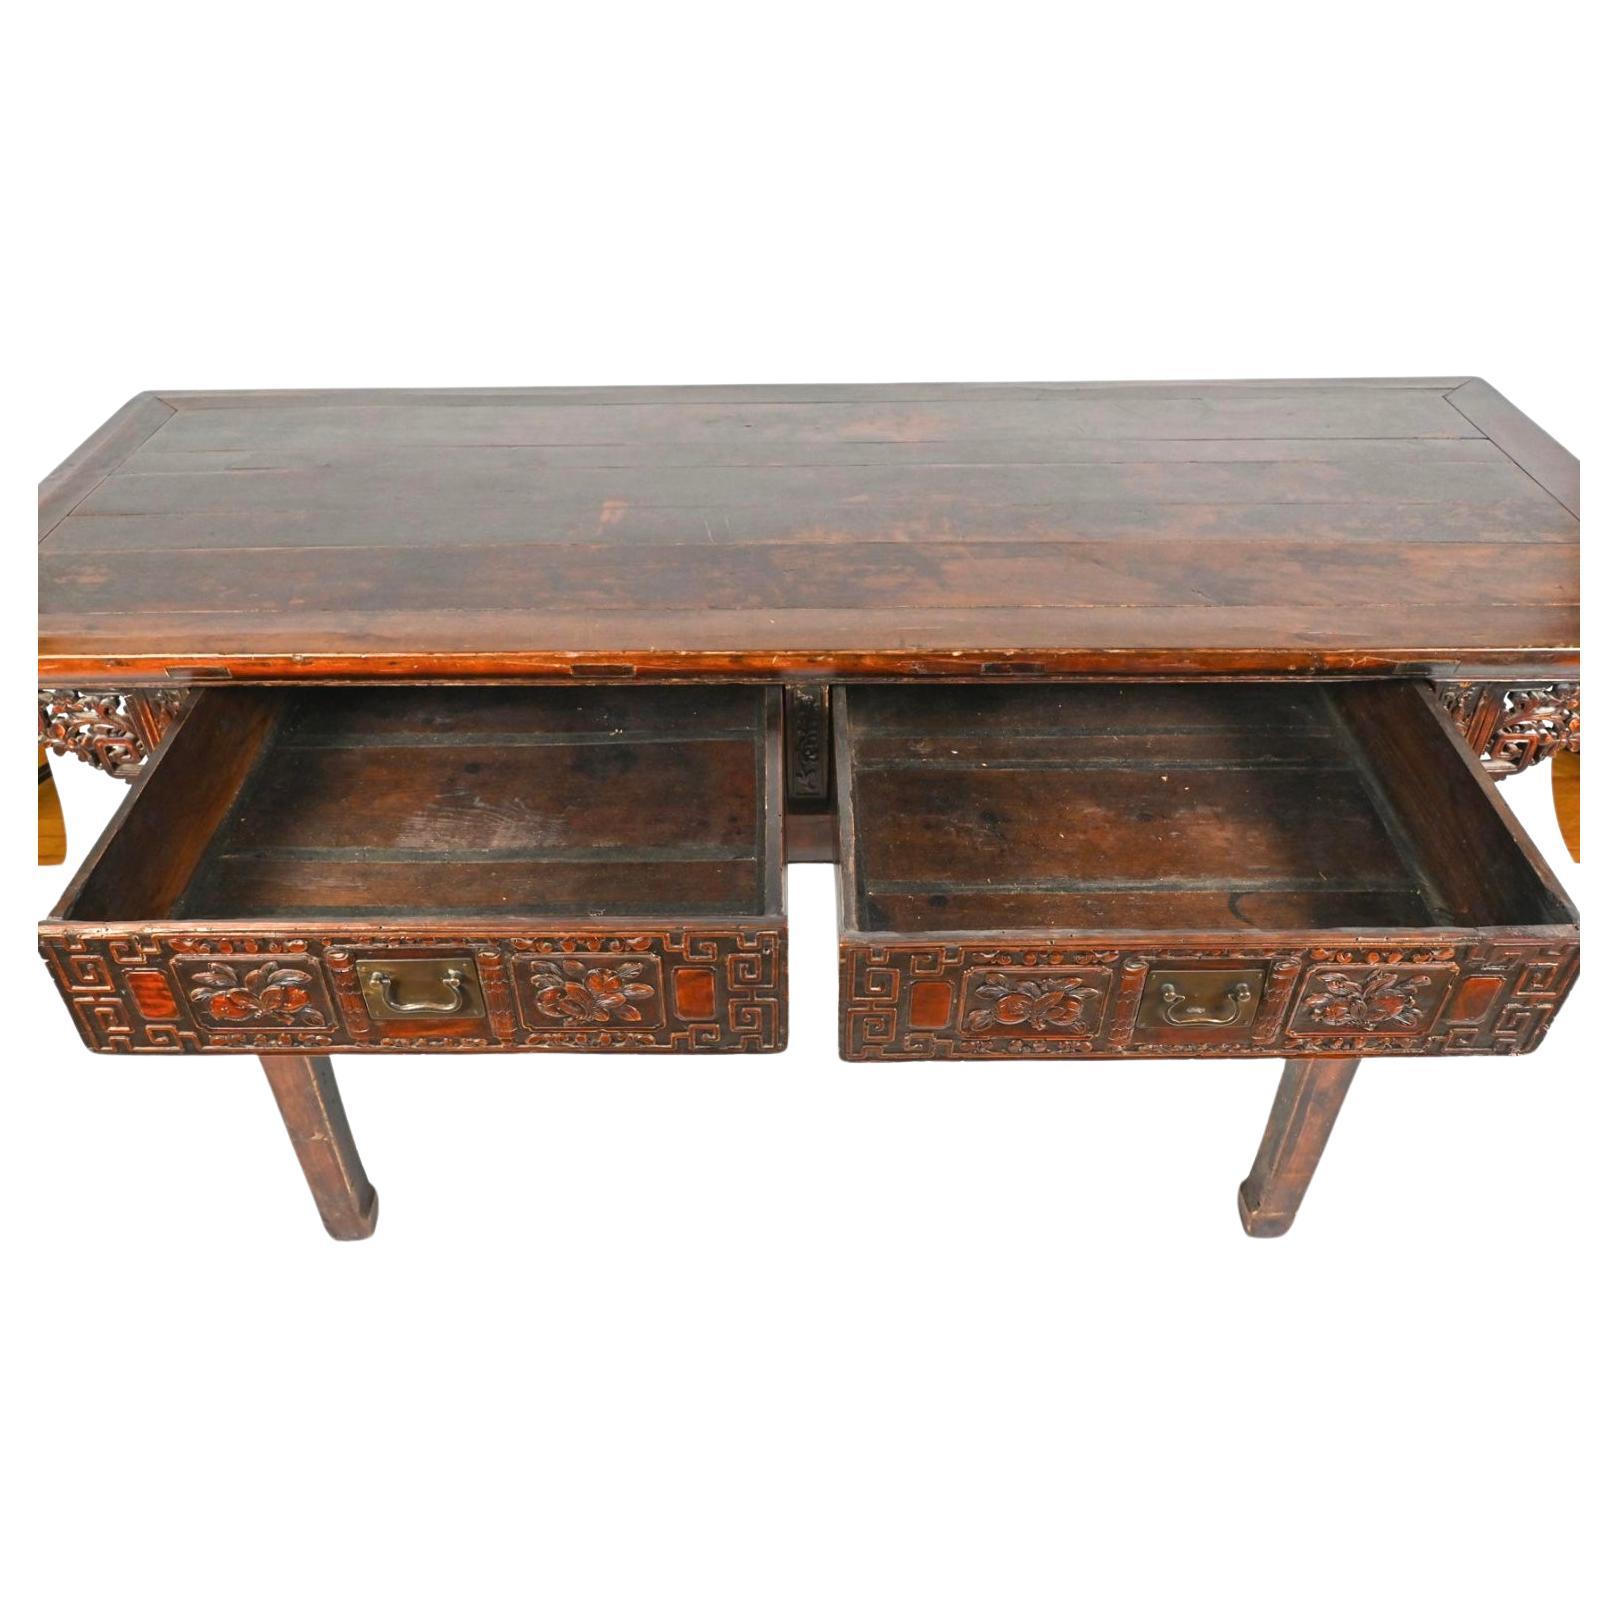 Late Qing Chinese Carved Altar Table with a paneled top and pierced carved skirt. Features two deep heavily carved dovetailed drawers with chamfered bottoms, through tenon construction. Elaborate very detailed carving throughout. Back sides and